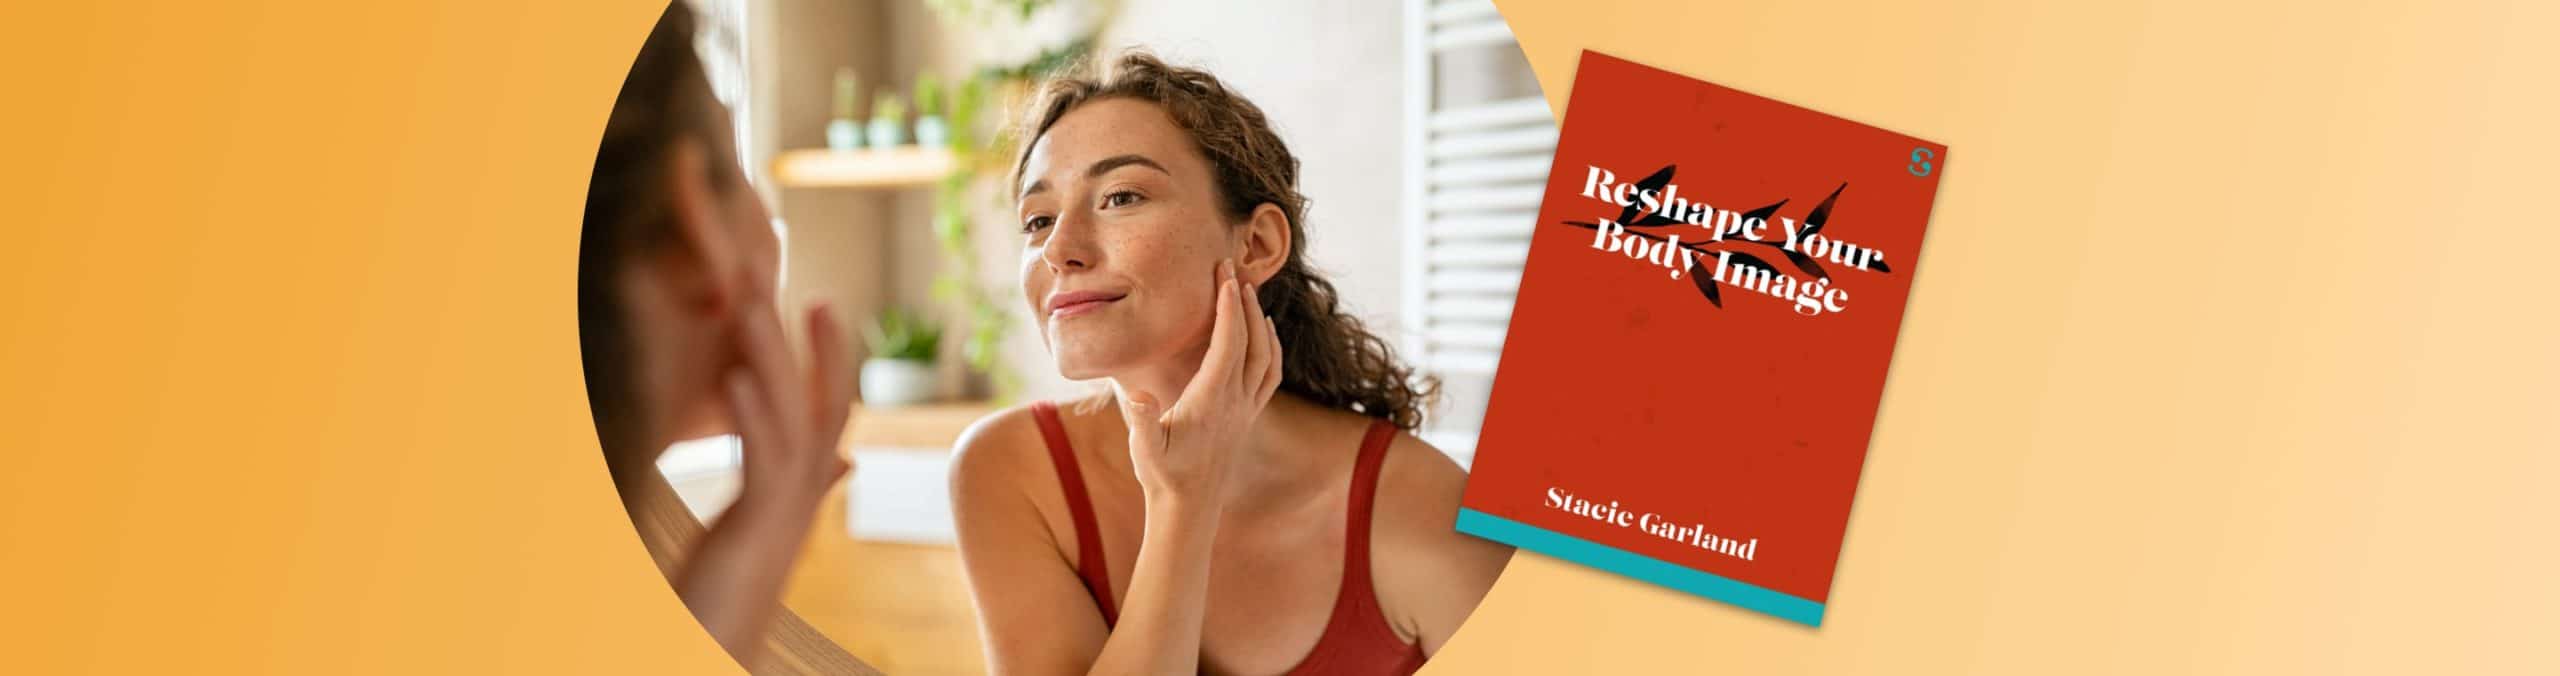 Scribd Coach author Stacie Garland on reshaping your body image